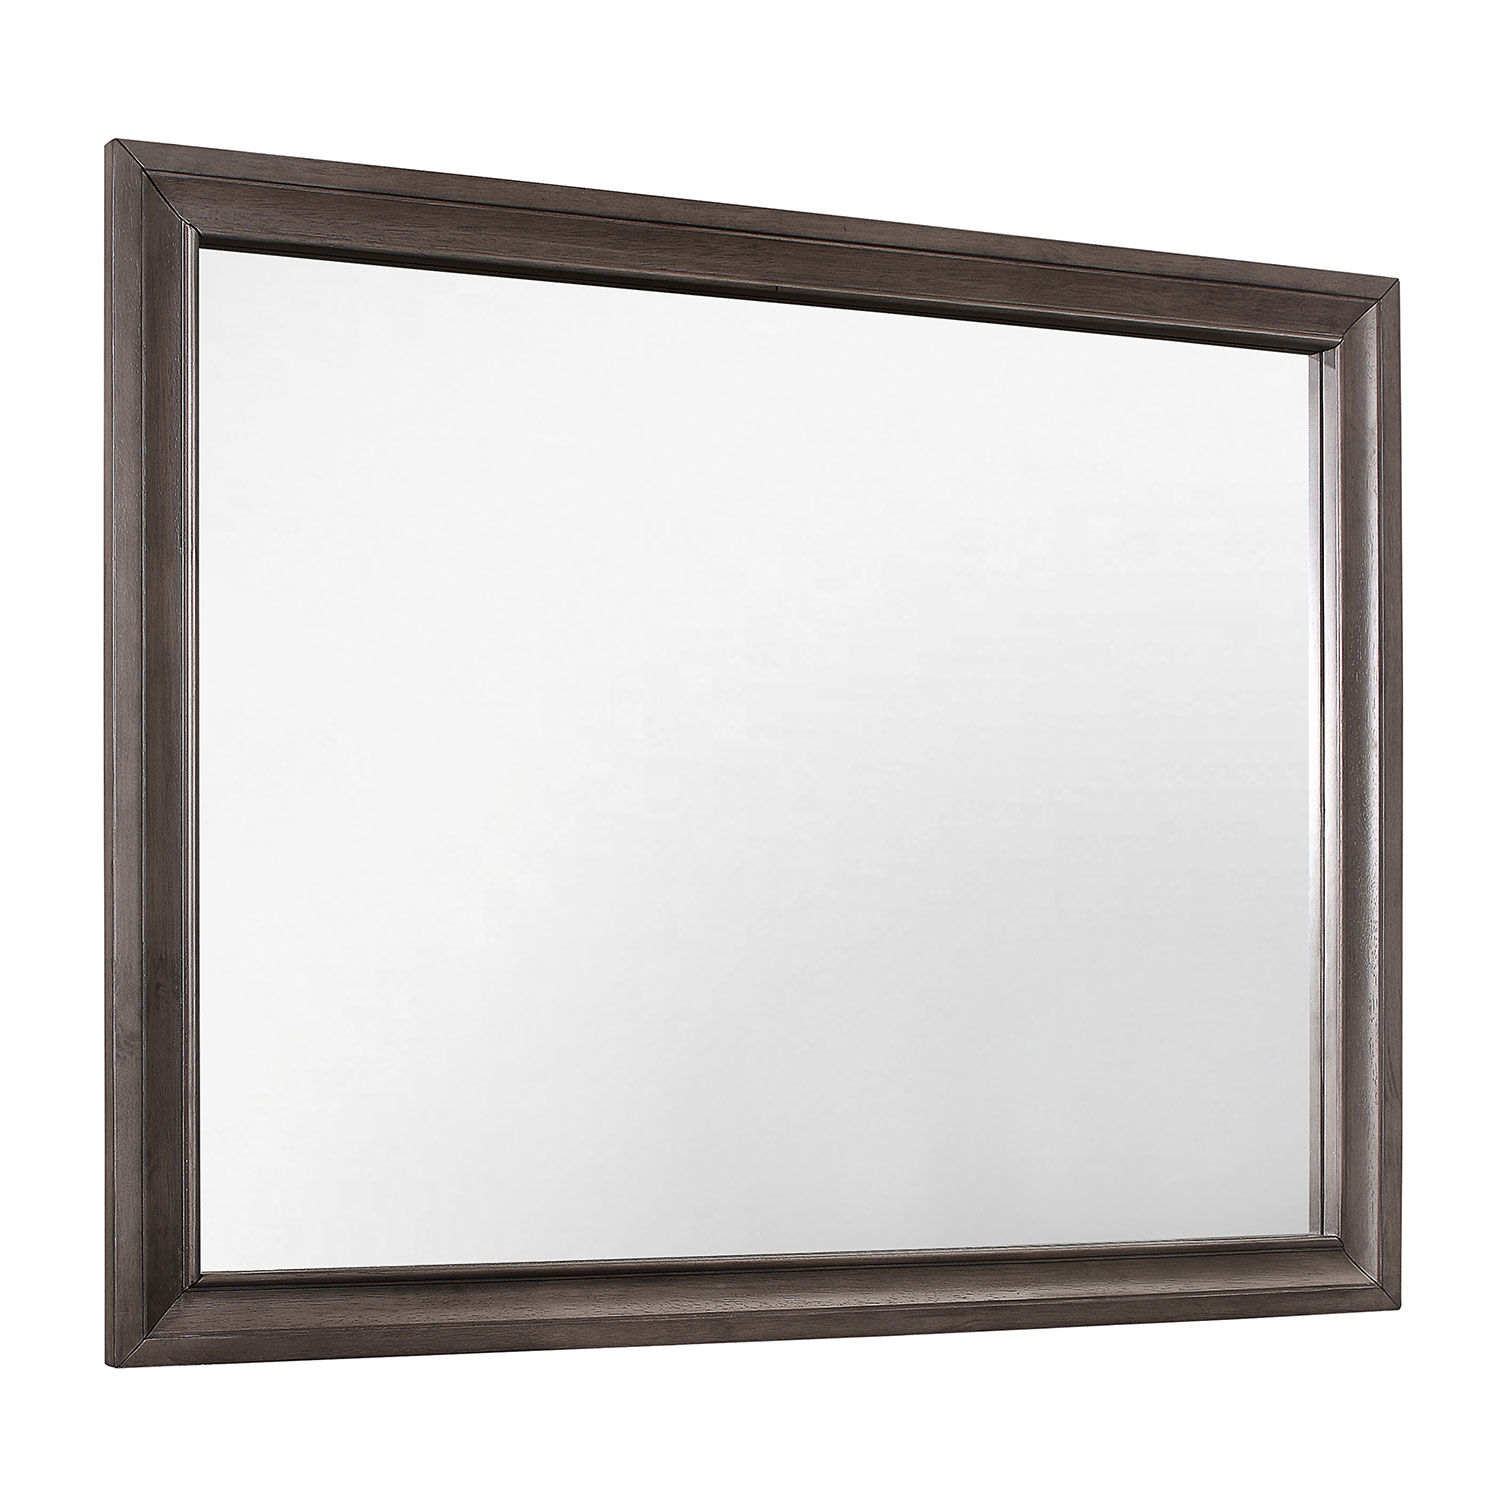 Homelegance Luster Mirror - Gray and Silver Glitter